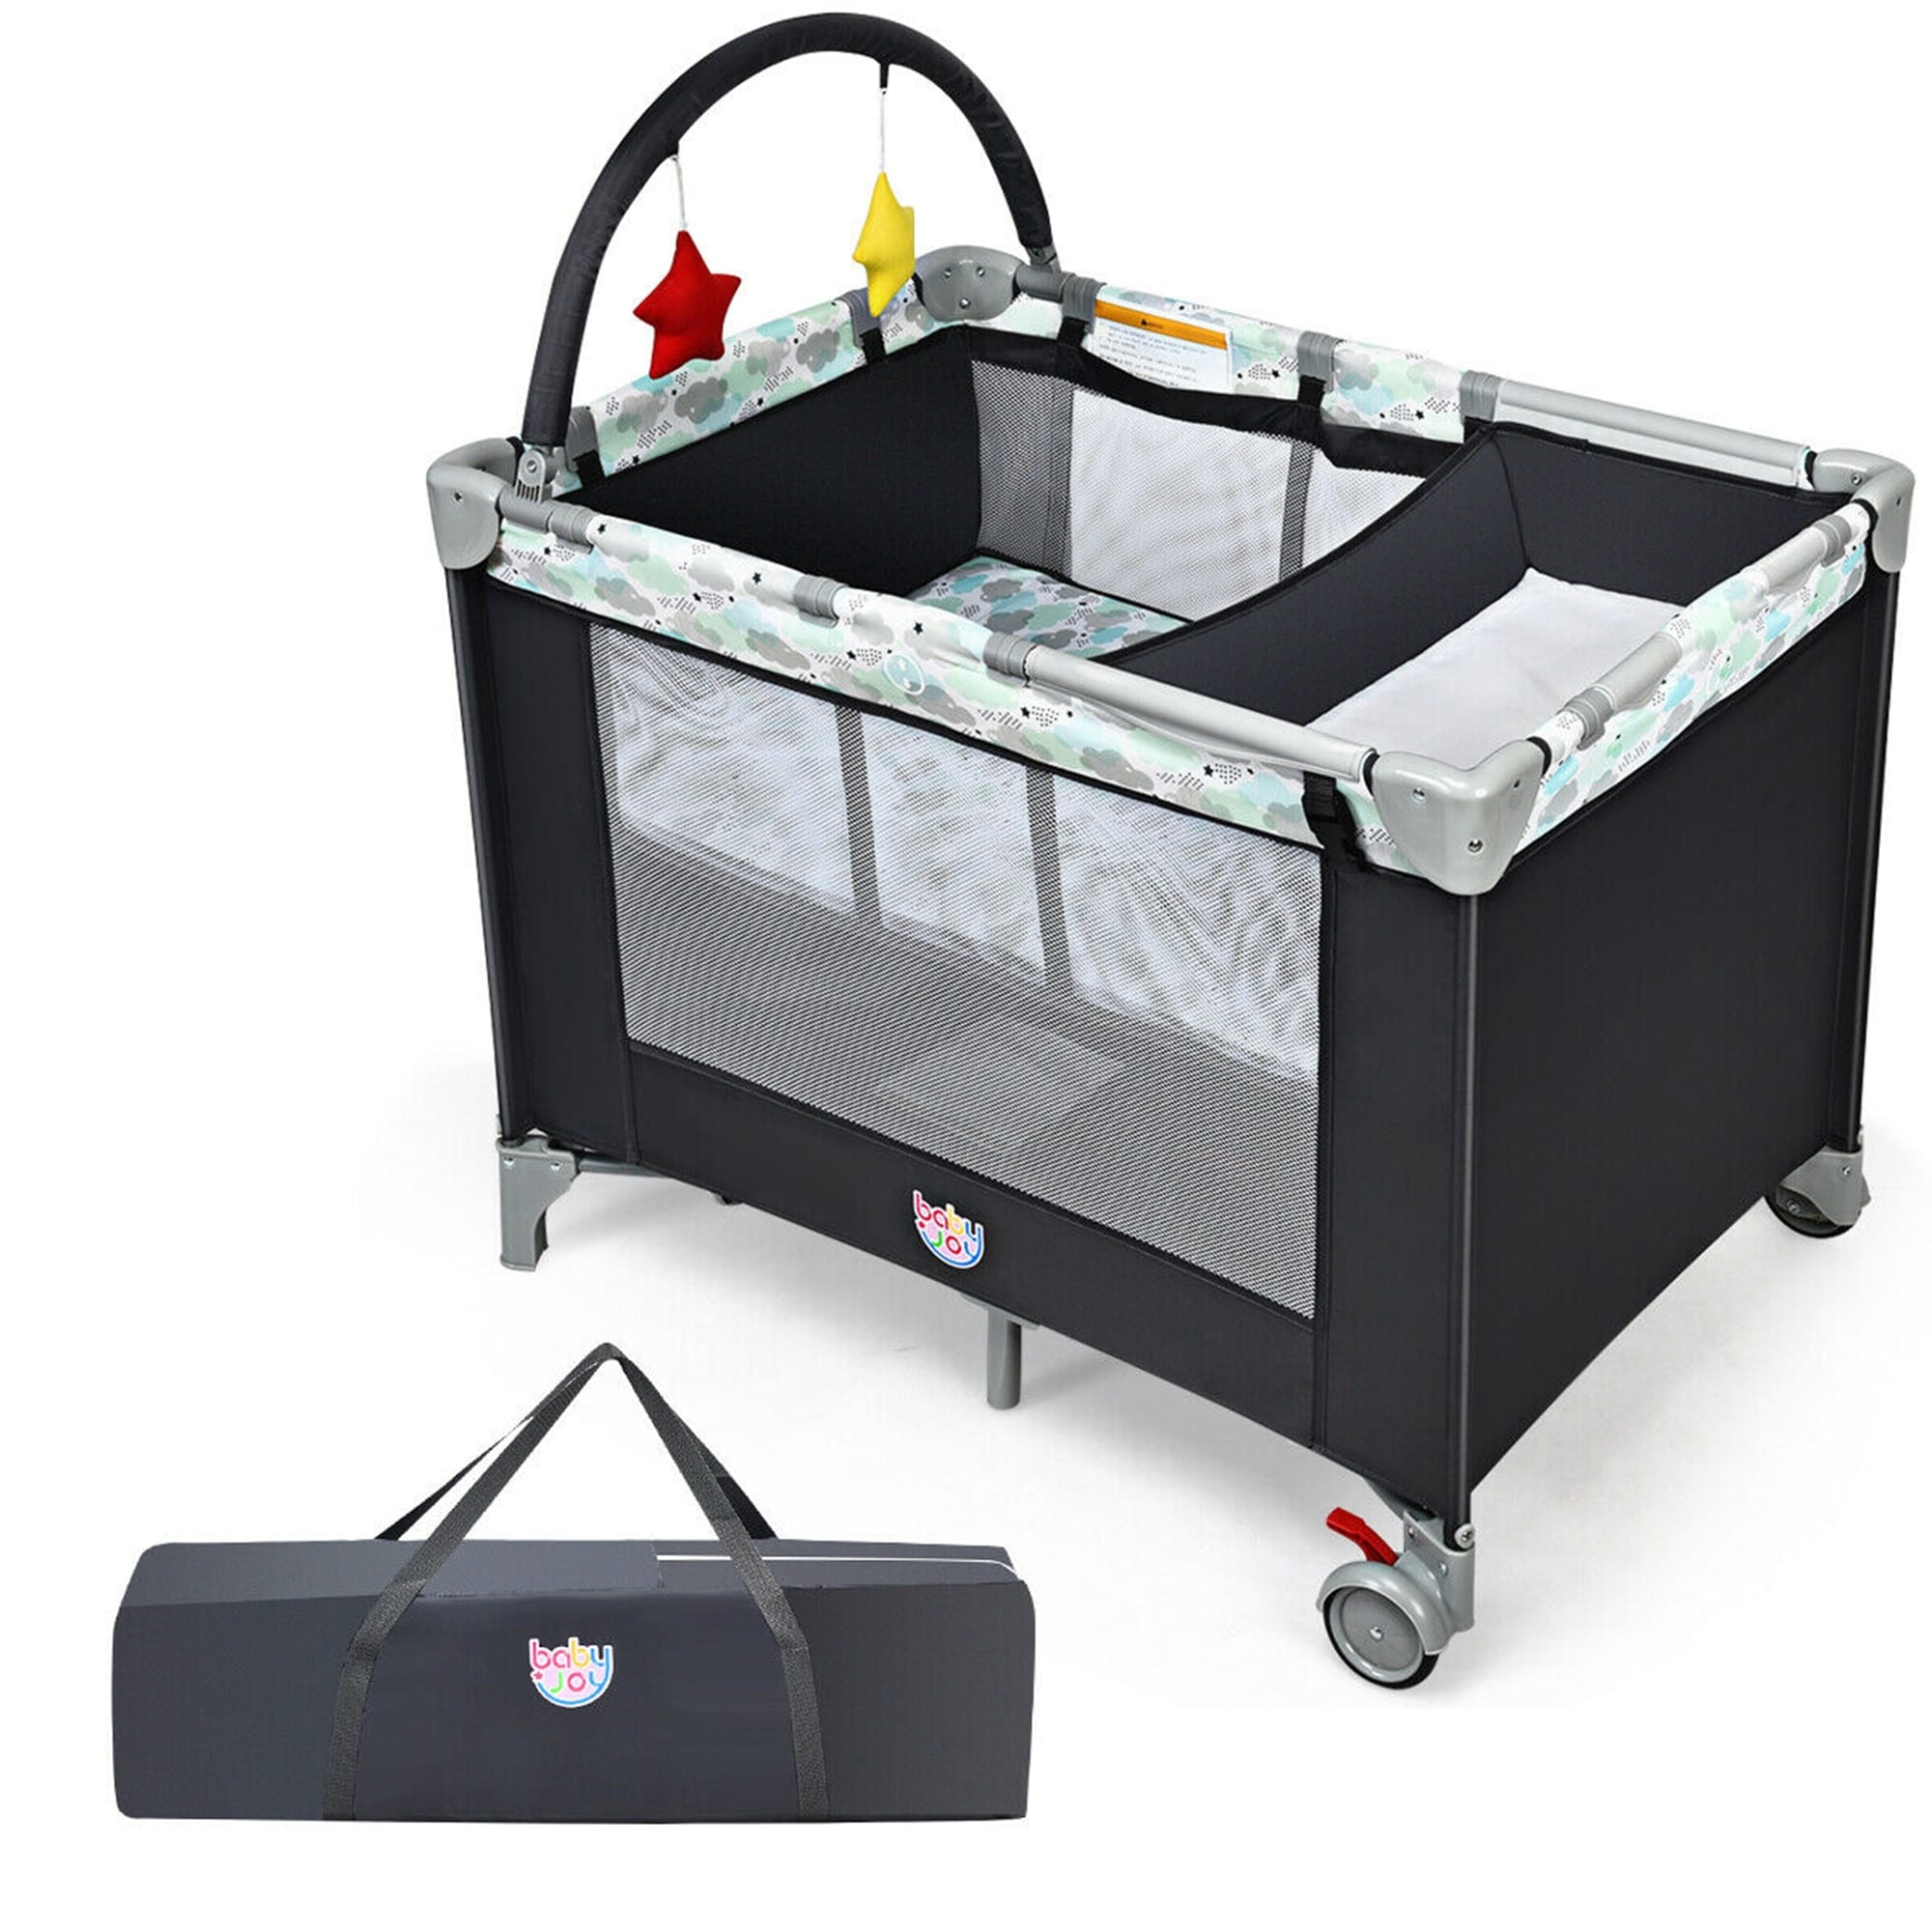 Gymax Portable Baby Playard Playpen Nursery Center w/ Changing Station